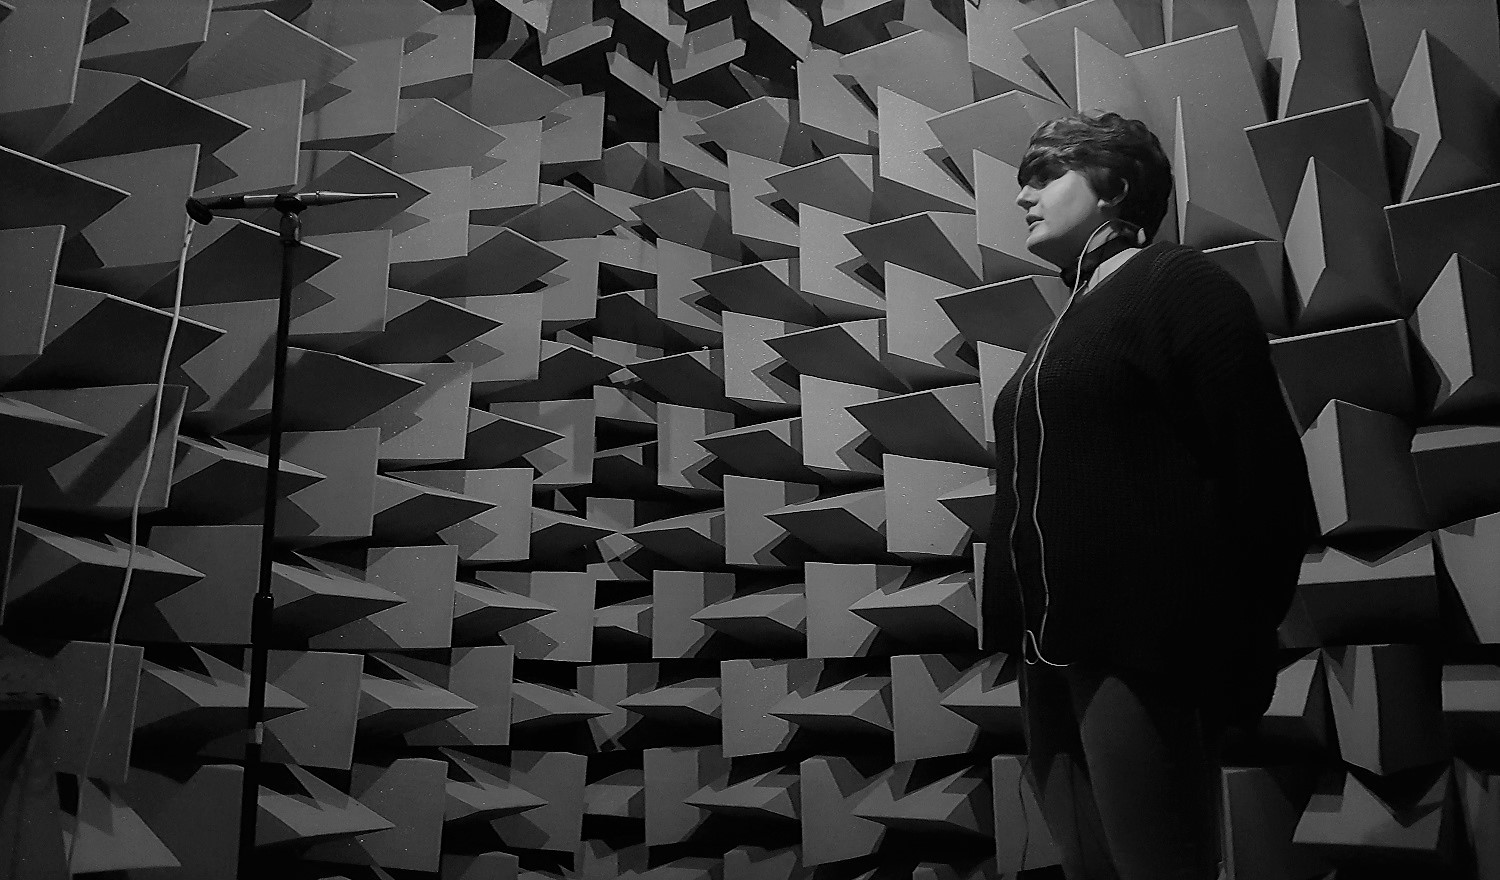 Singer in Anechoic Chamber